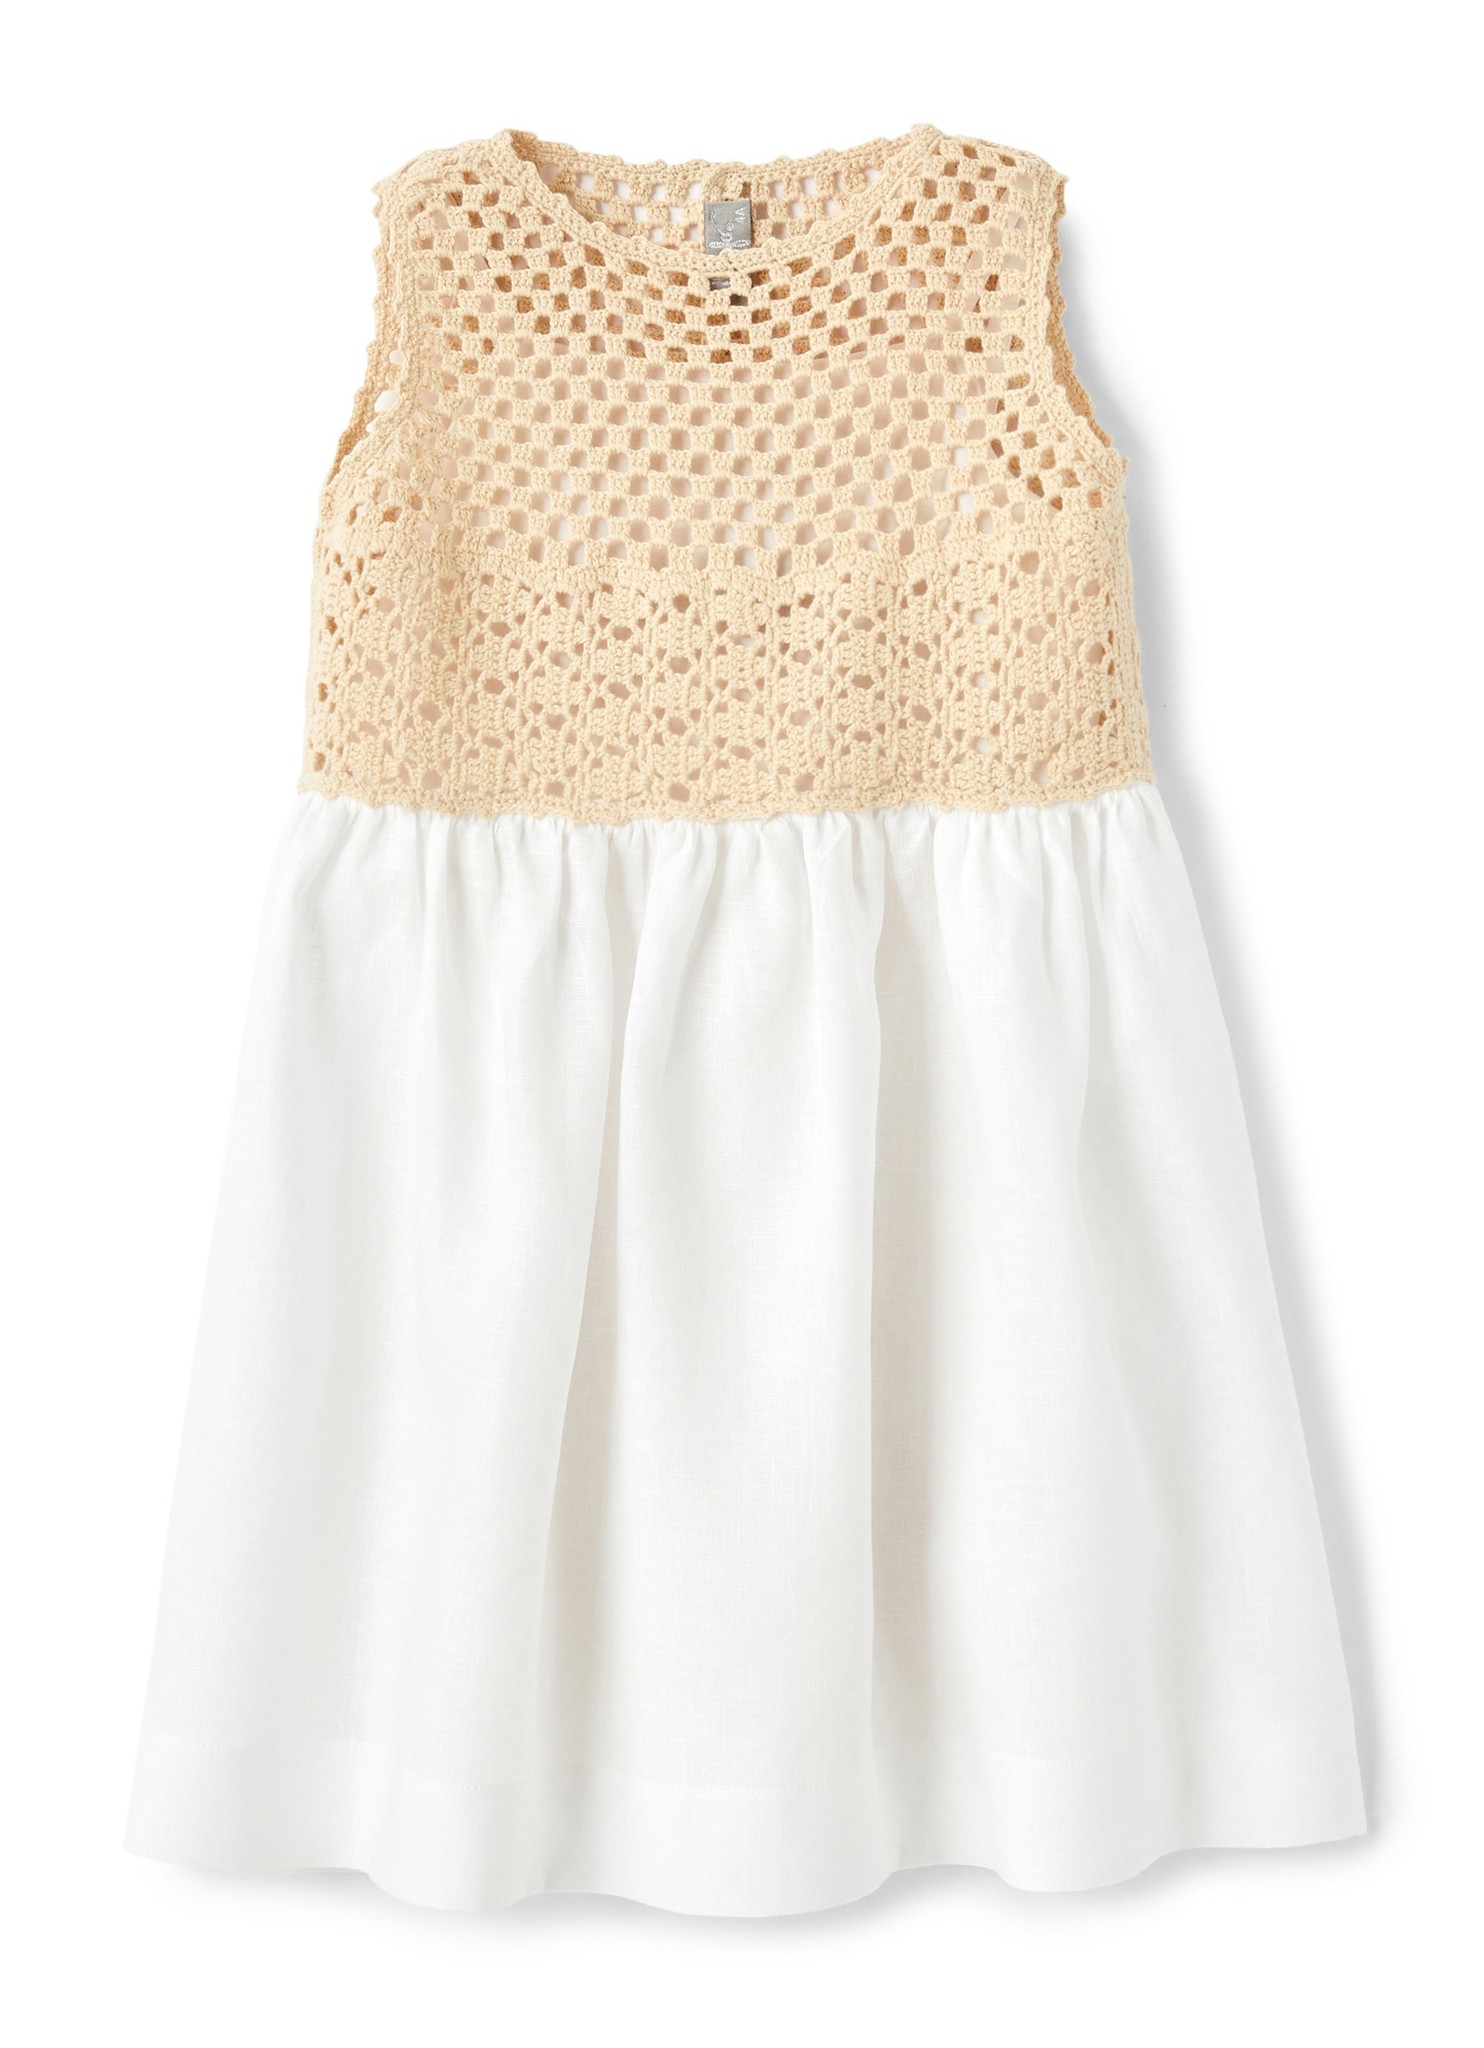 IL GUFO - LINEN AND CROCHET DRESS - igloobaby